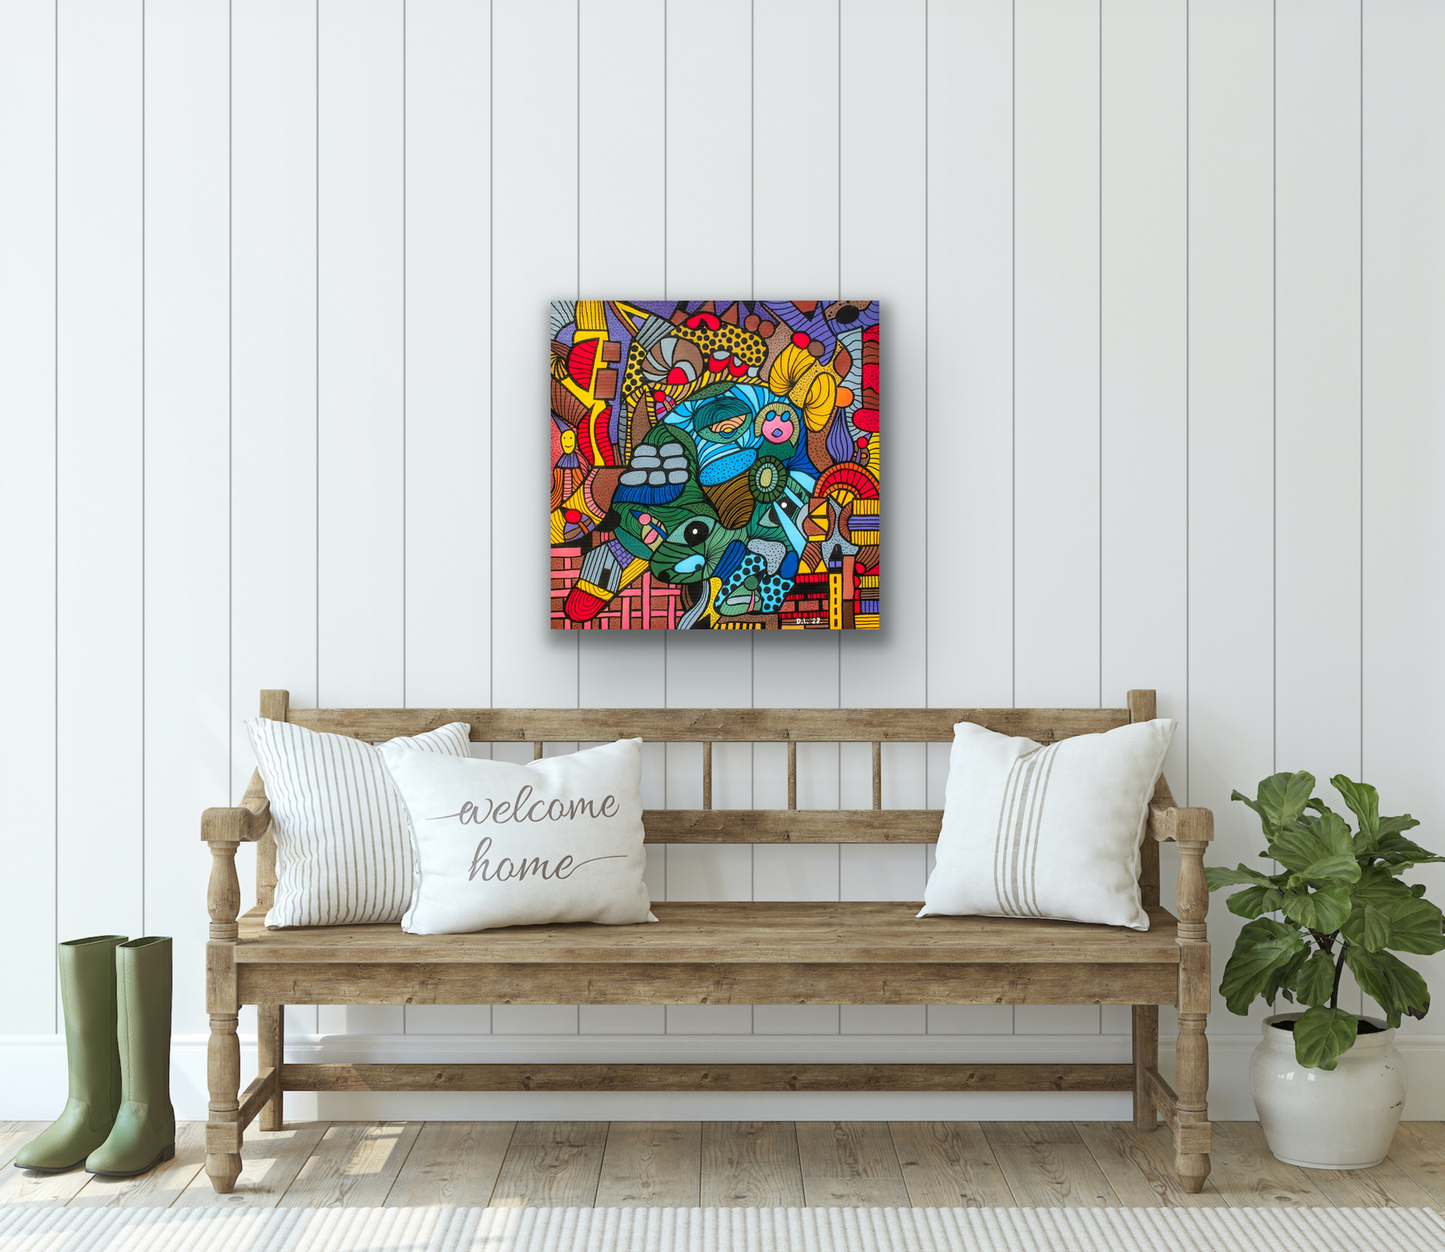 "Nagasaki Blue" by David Laird is a lively work of art that will compliment and command attention in any room you choose to place it.